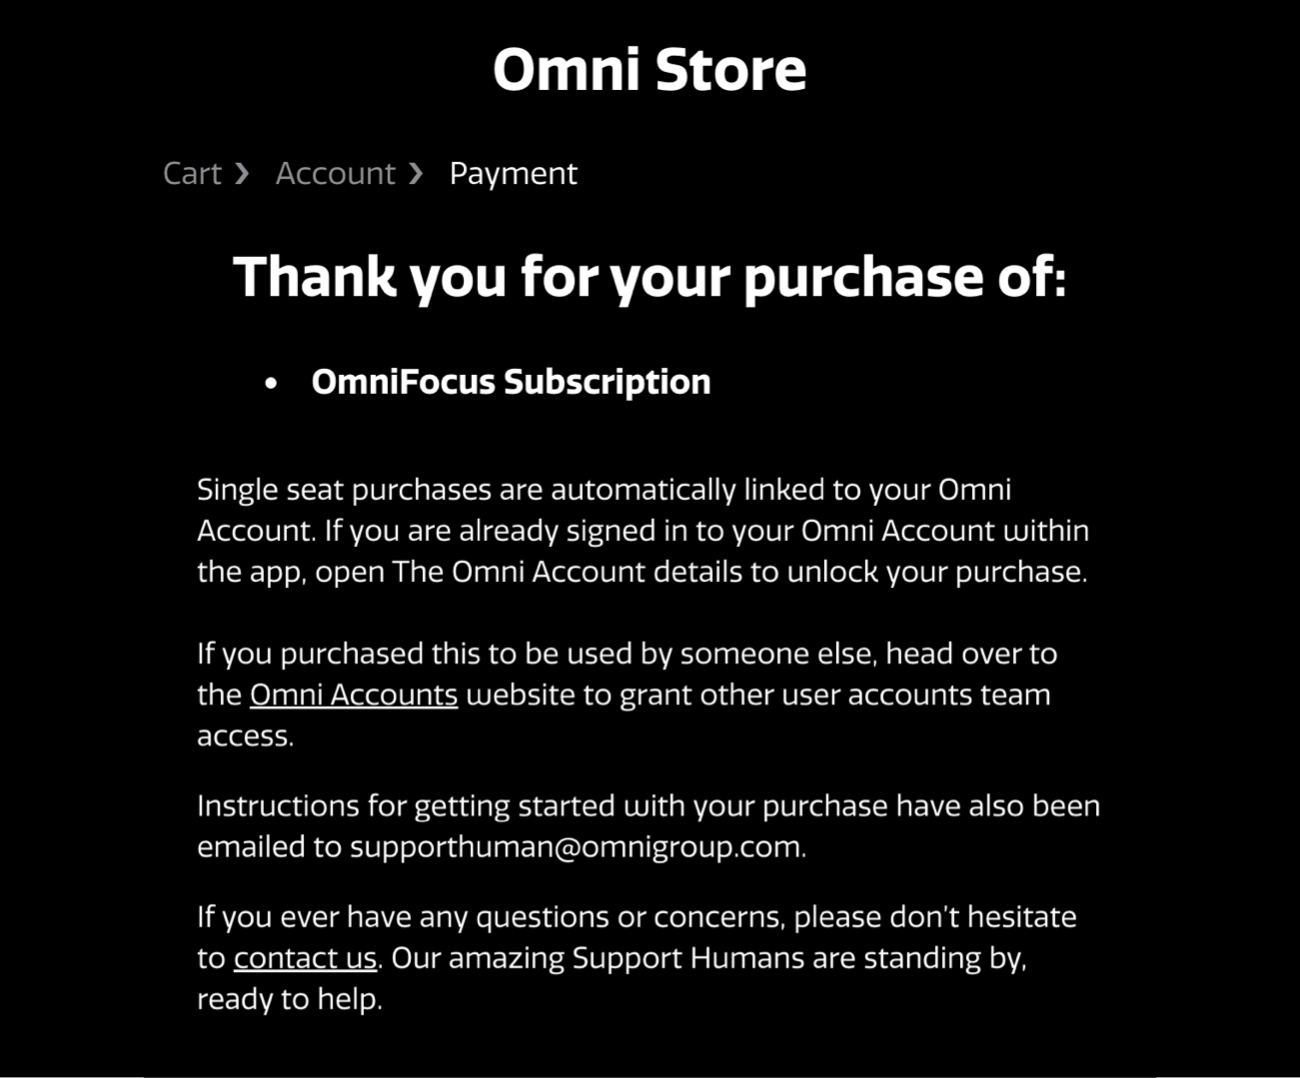 A thank you message confirming a subscription purchase from the Omni Store.